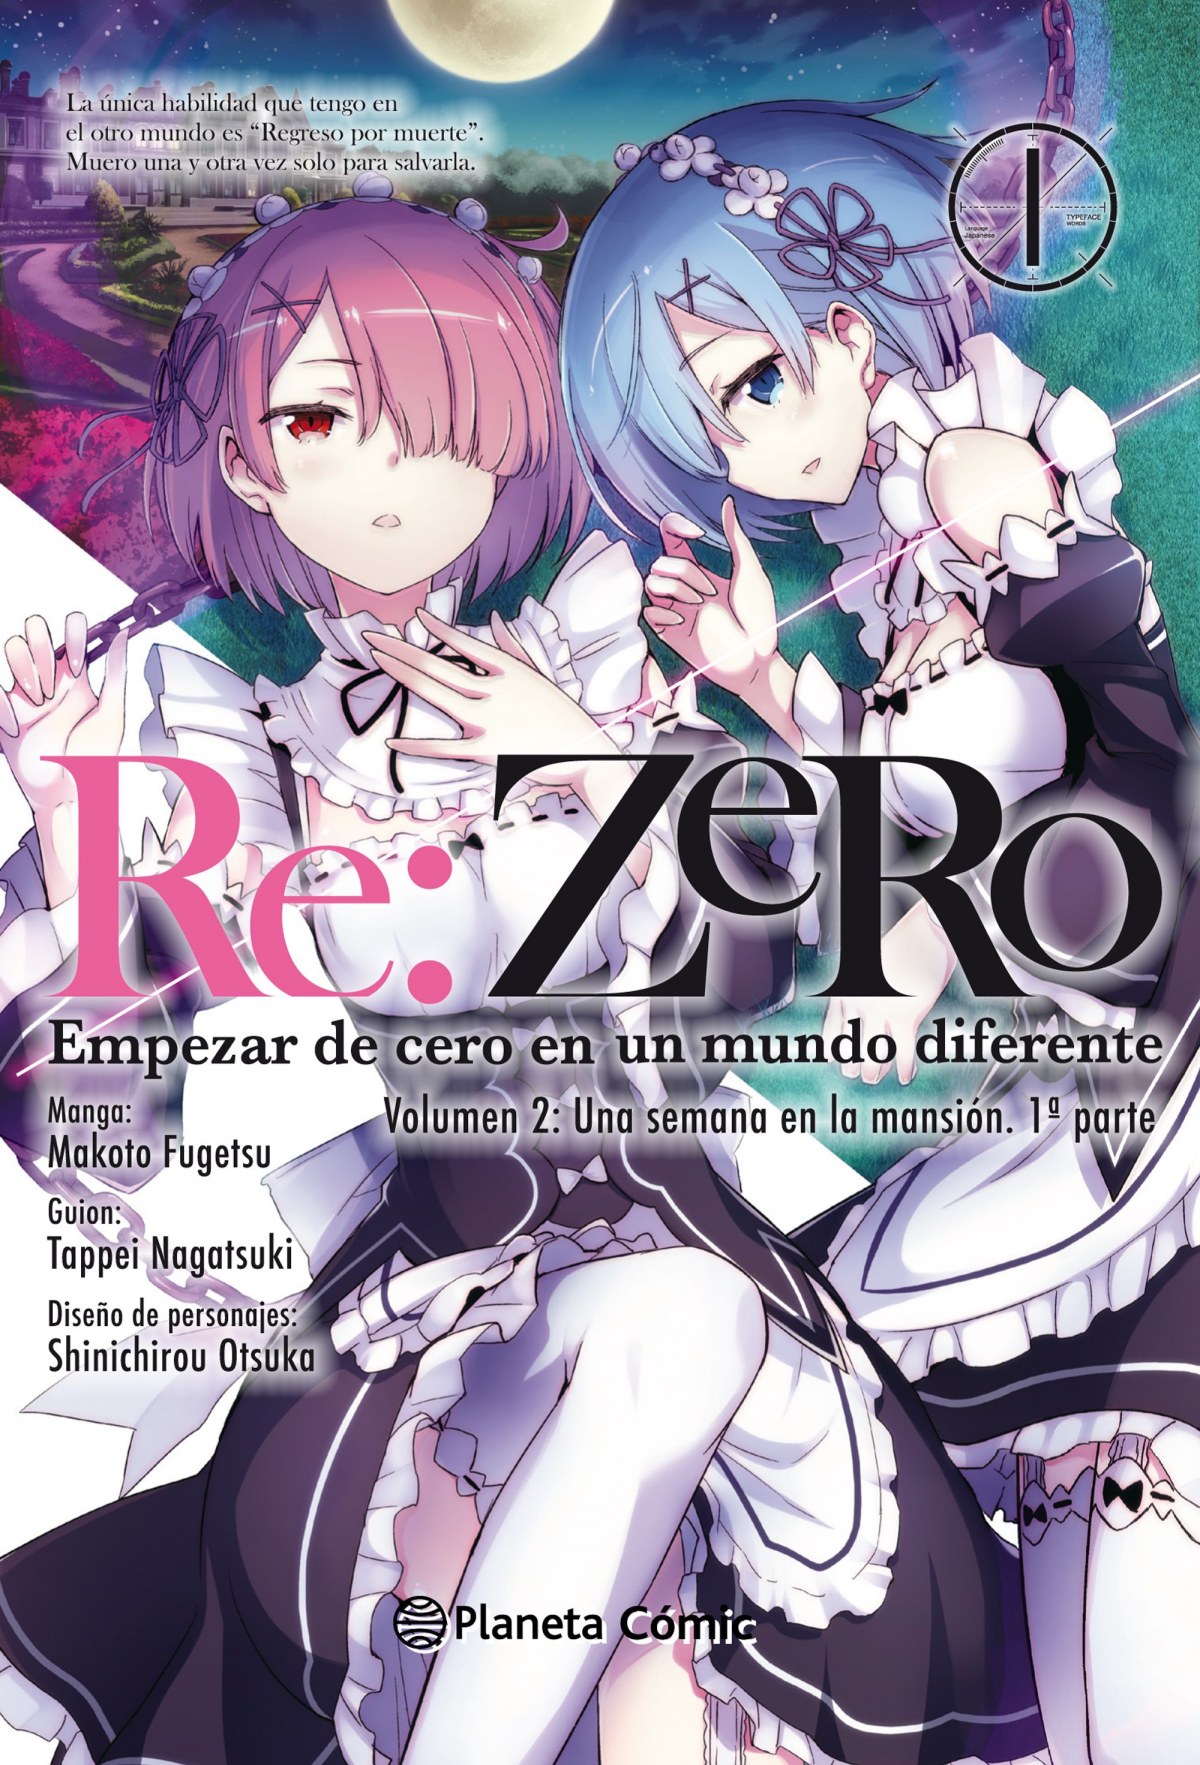 Re:ZERO -Starting Life in Another World-, Vol. 2: Chapter 1: A Day in the  Capital (manga) by Tappei Nagatsuki